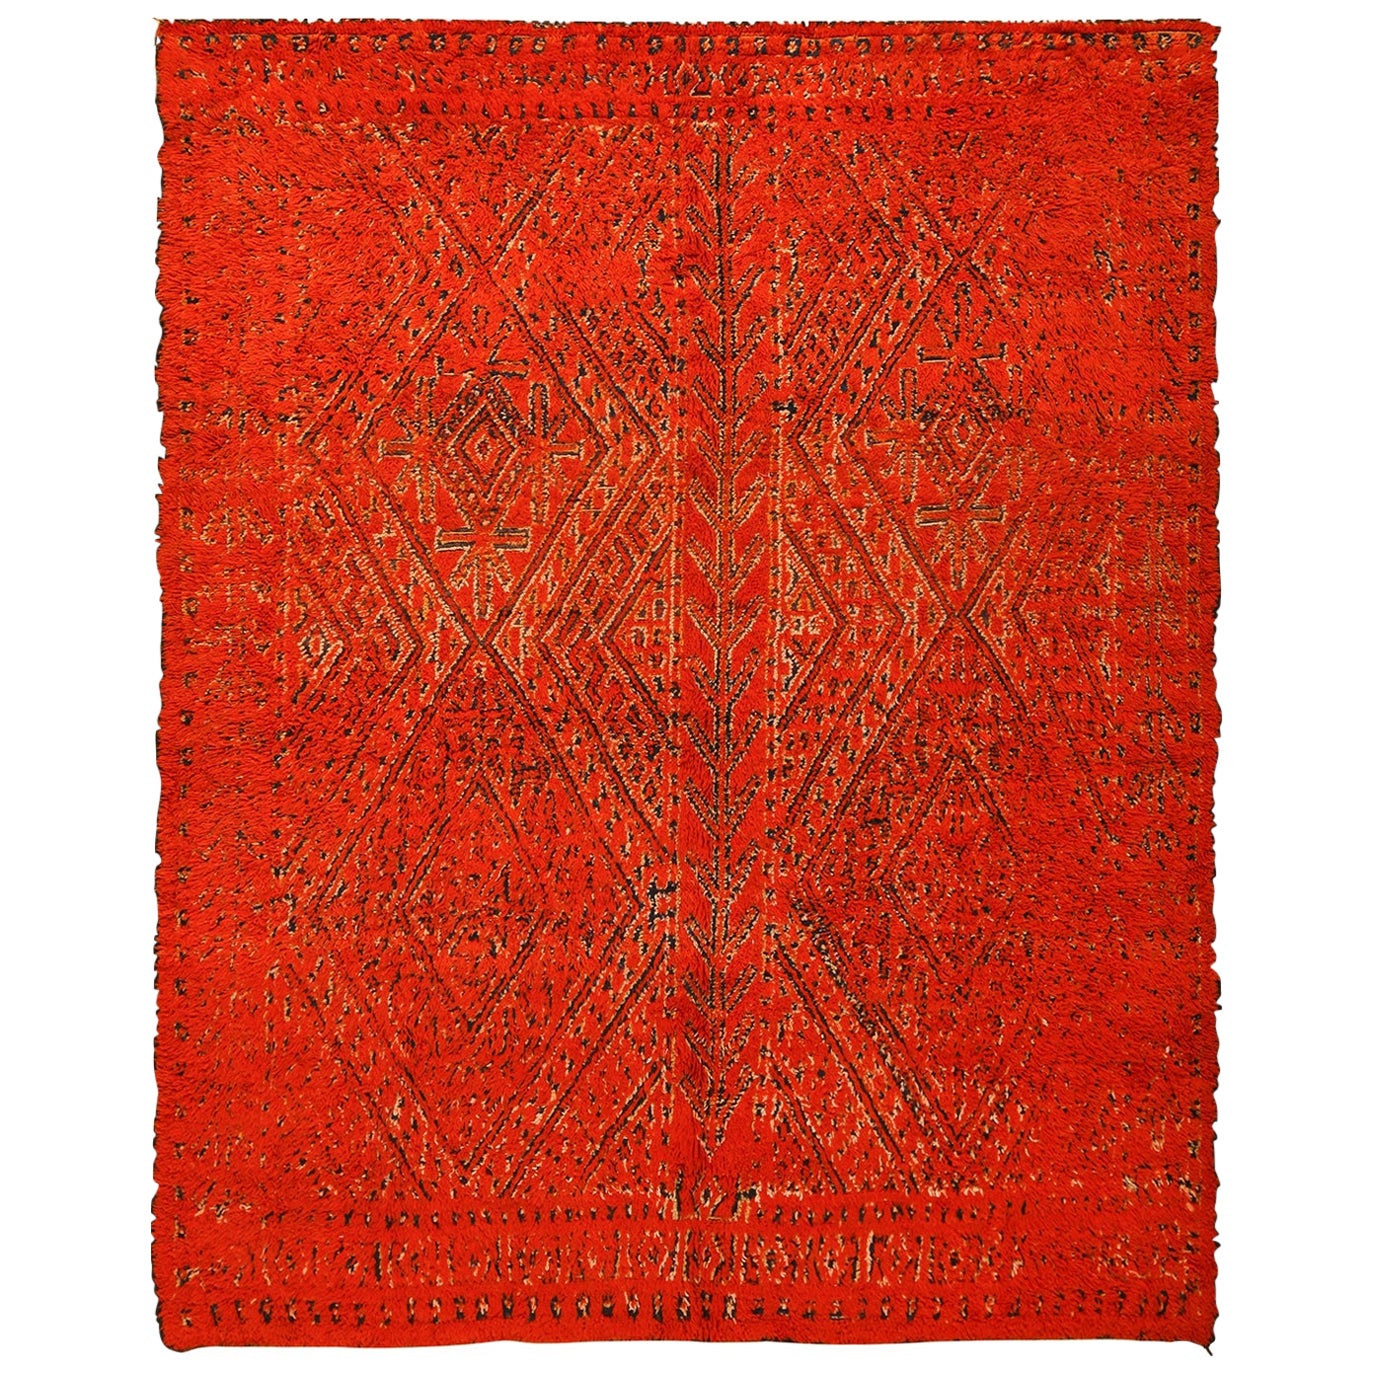 Tapis berbère marocain rouge vintage. Taille : 7 ft x 8 ft 7 in